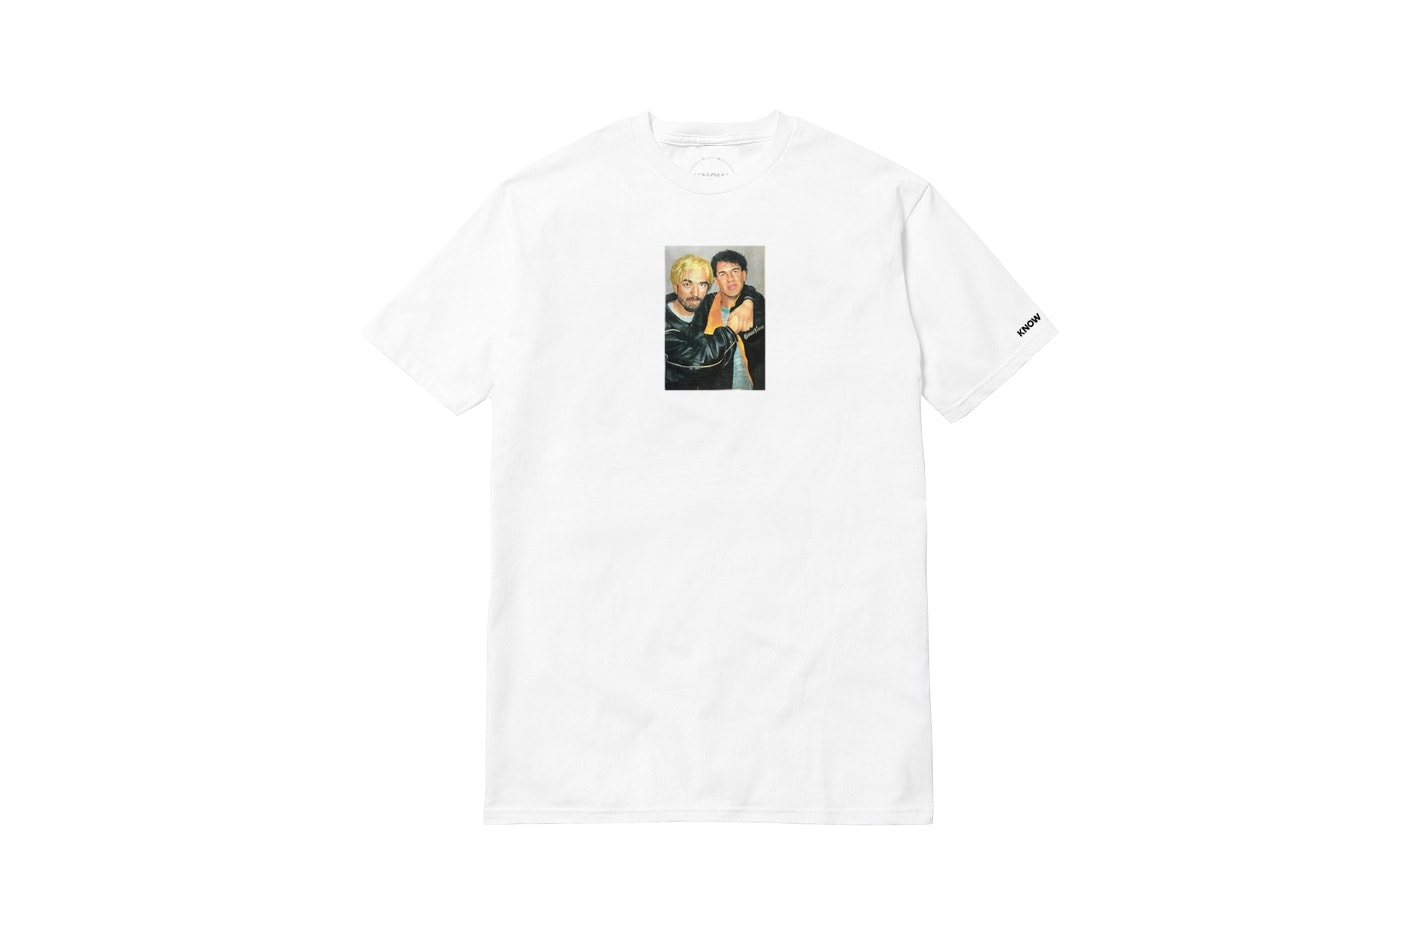 Good Time Know Wave T-shirt Capsule